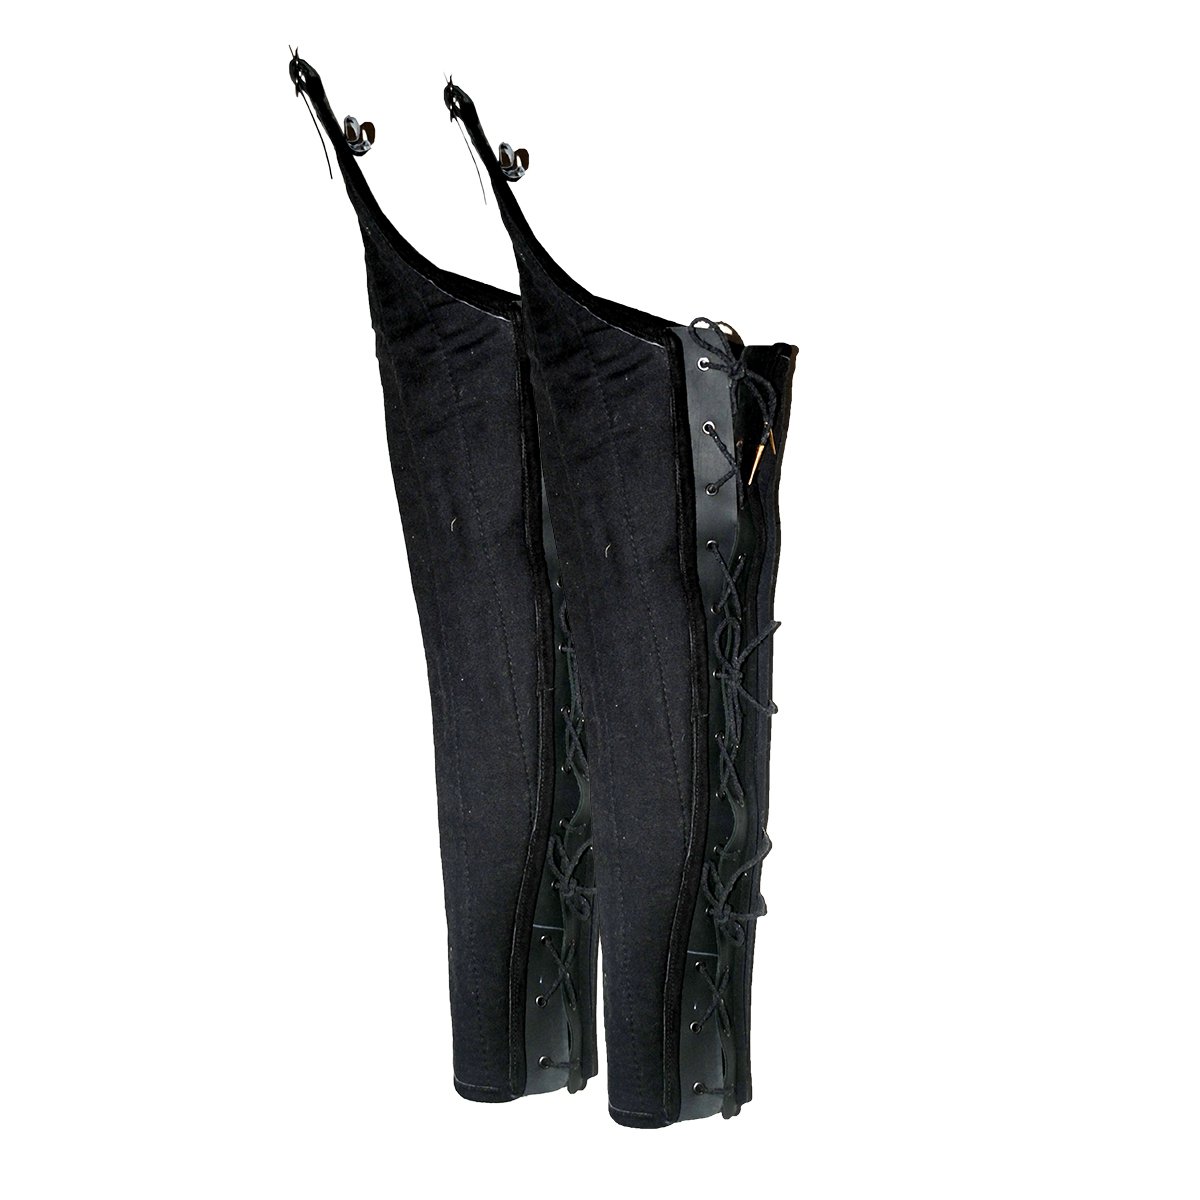 Crusader Padded Trousers - black, Size XXL